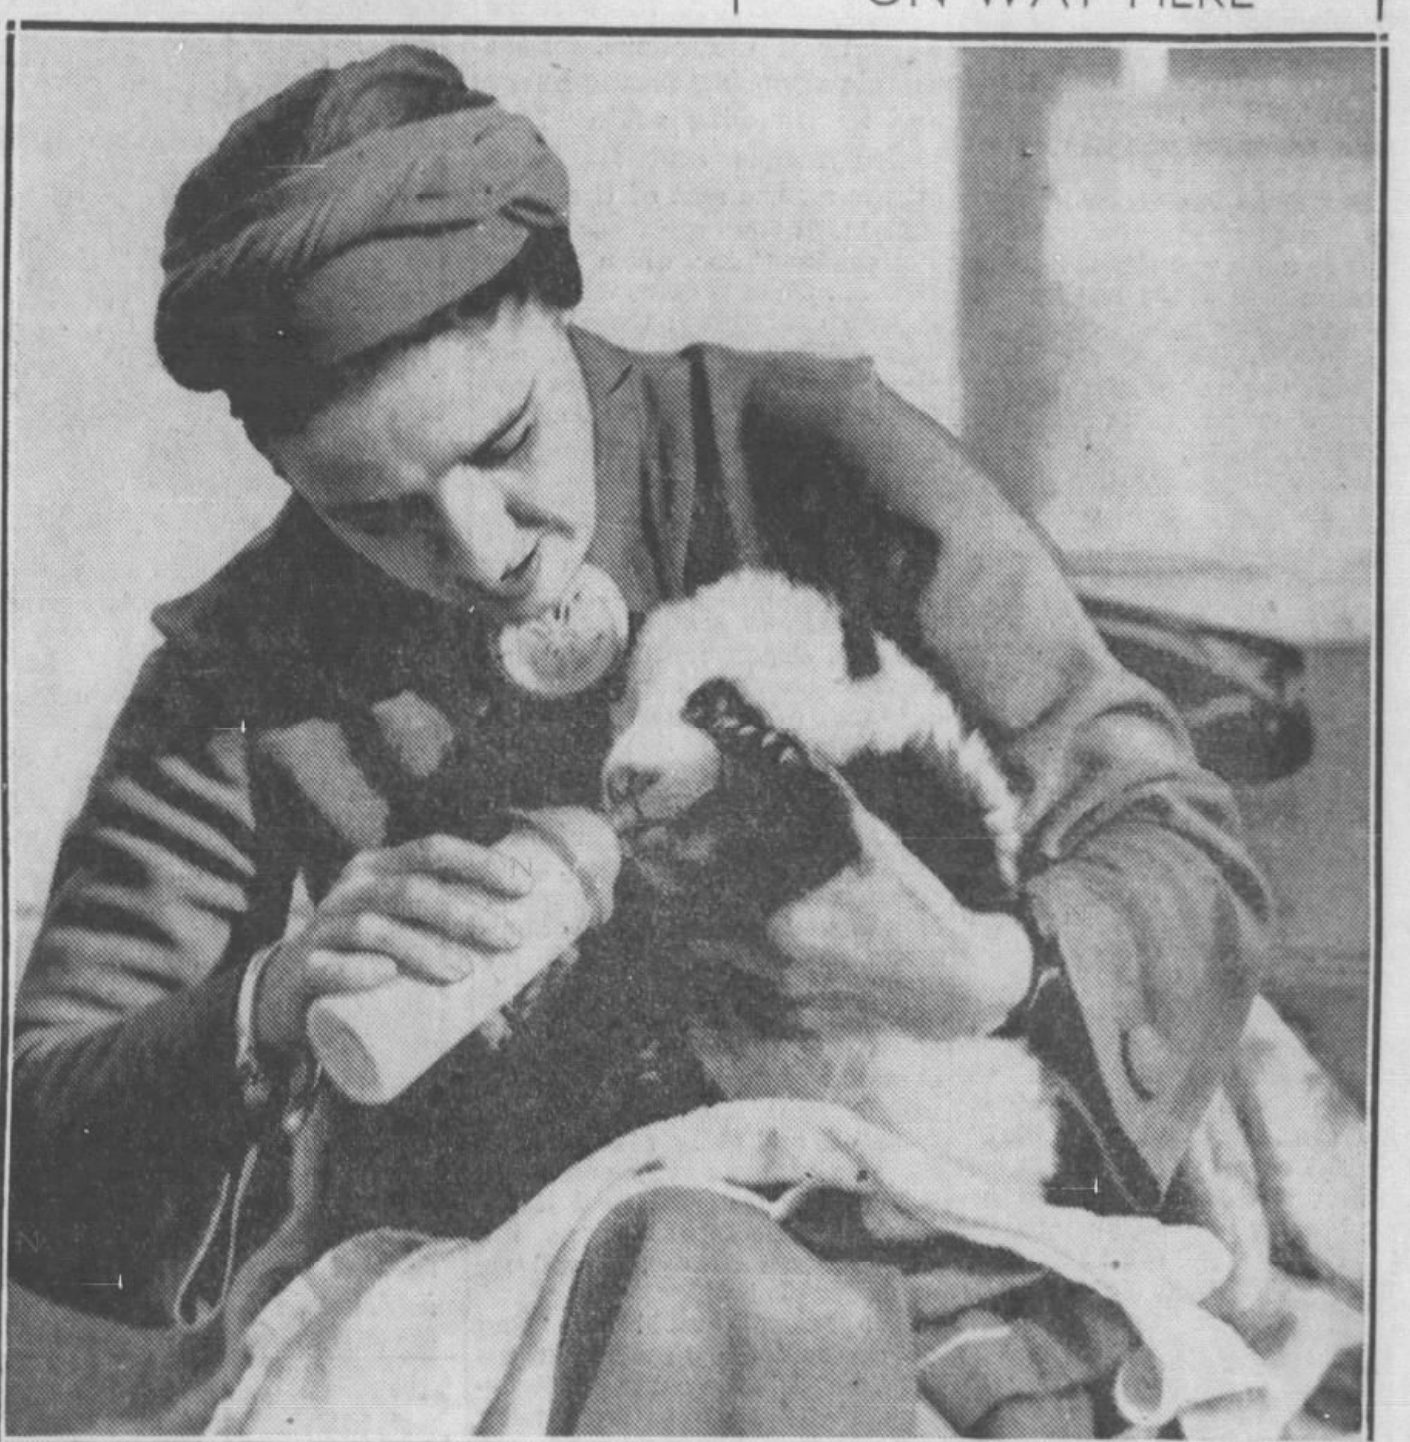 A person in a headwrap bottle feeds a panda cub cradled in cloth.